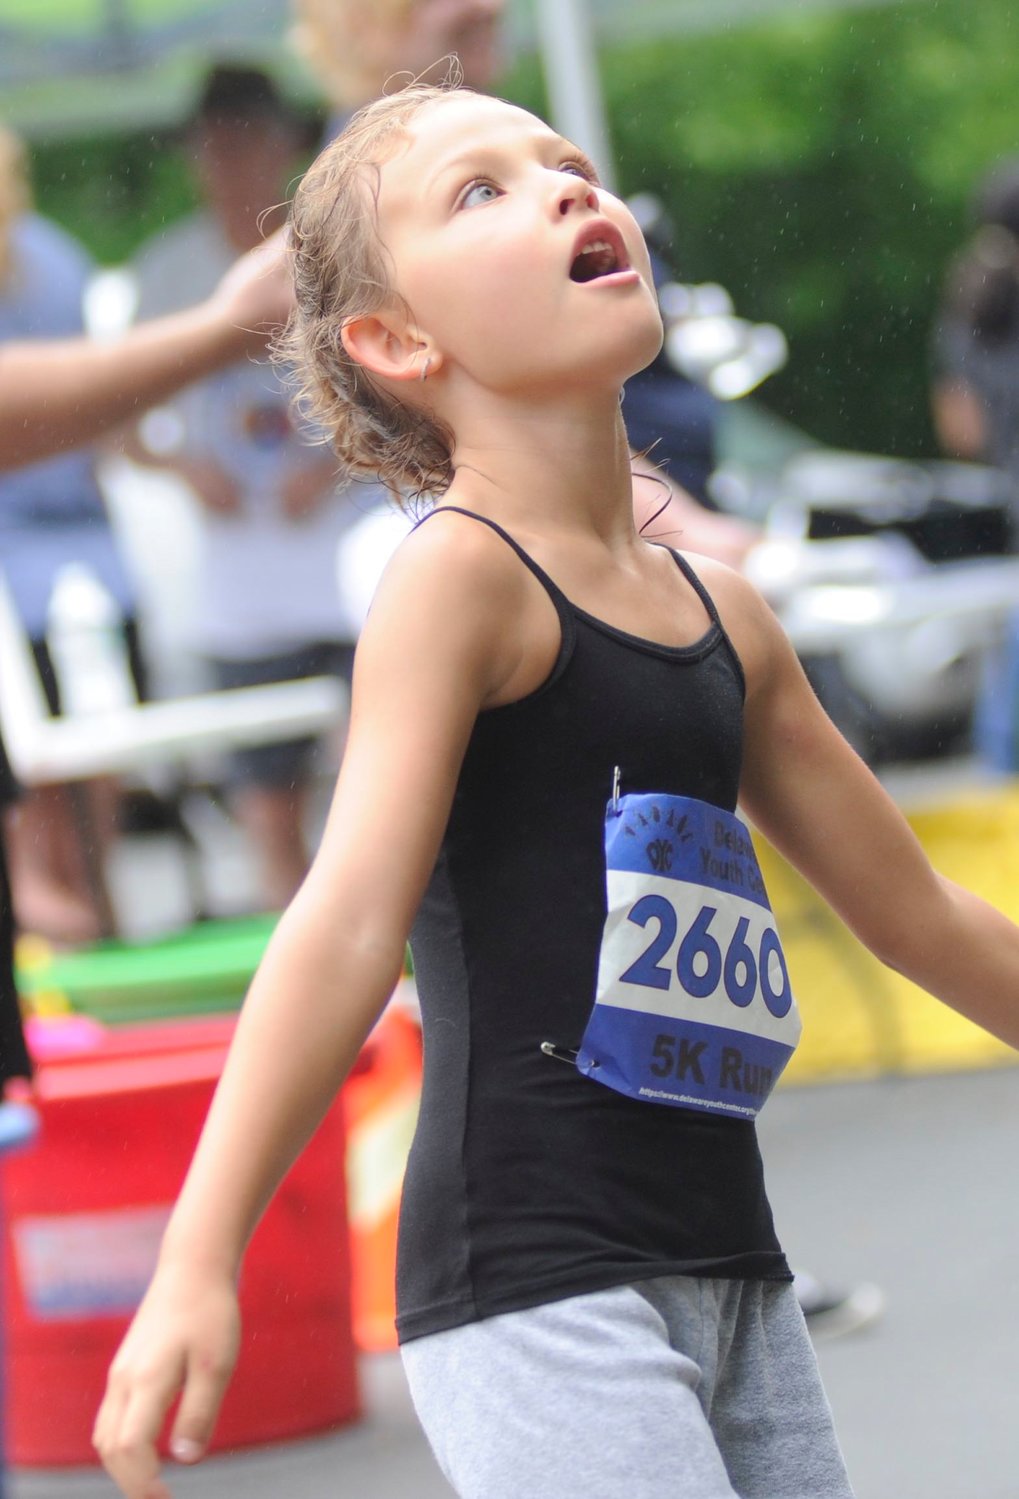 Savoring the moment. Six-year-old Addilyn Johnson of North Branch, NY and her father Thelonious posted matching times of 45:47 in the 5K run: She took 68th in females, while he placed 71st in the men’s.